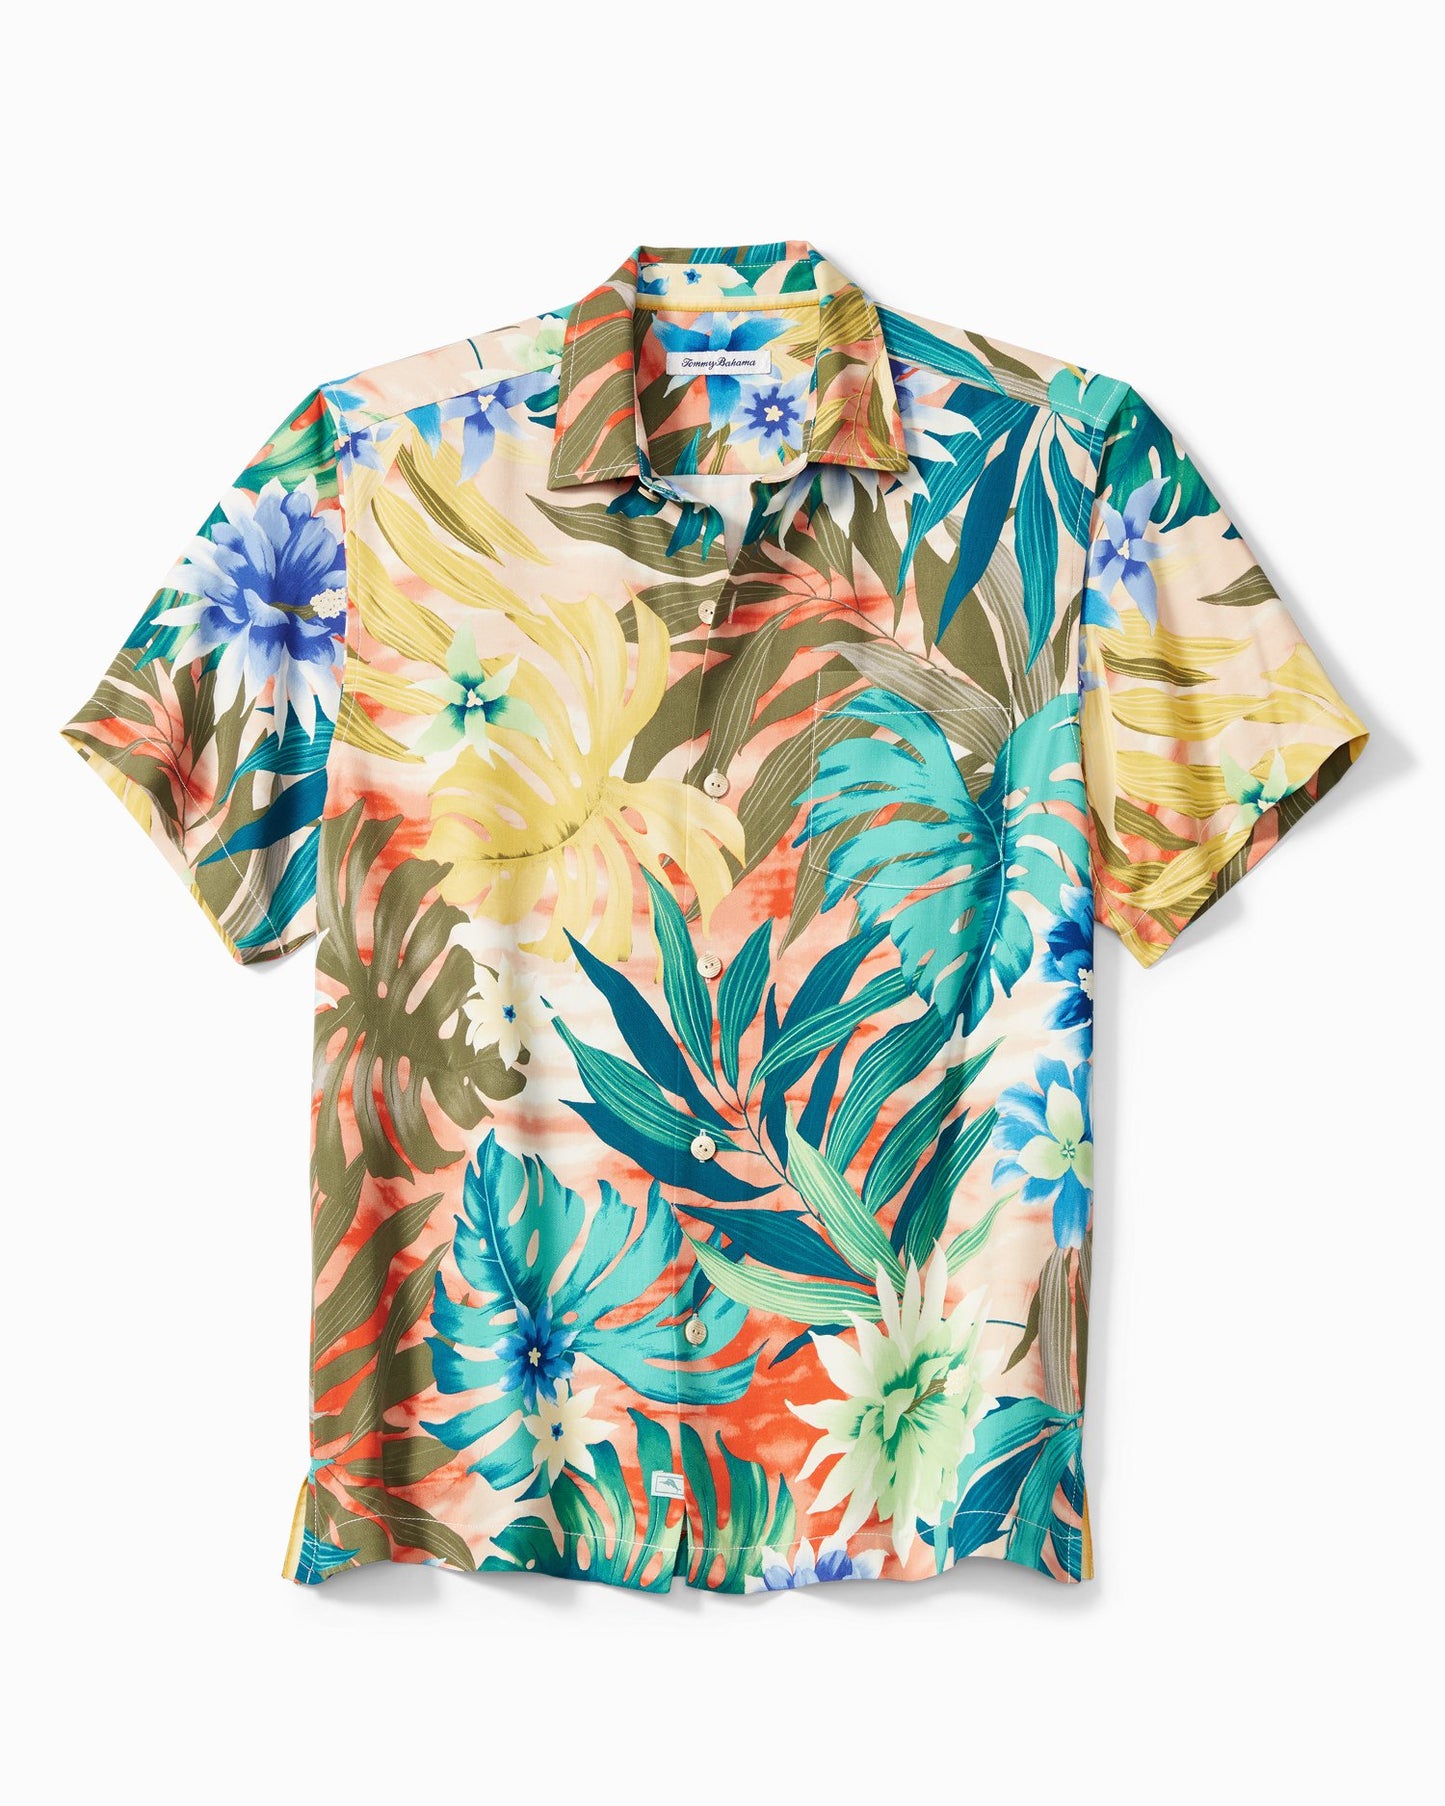 Garden of Hope and Courage Silk Camp Shirt